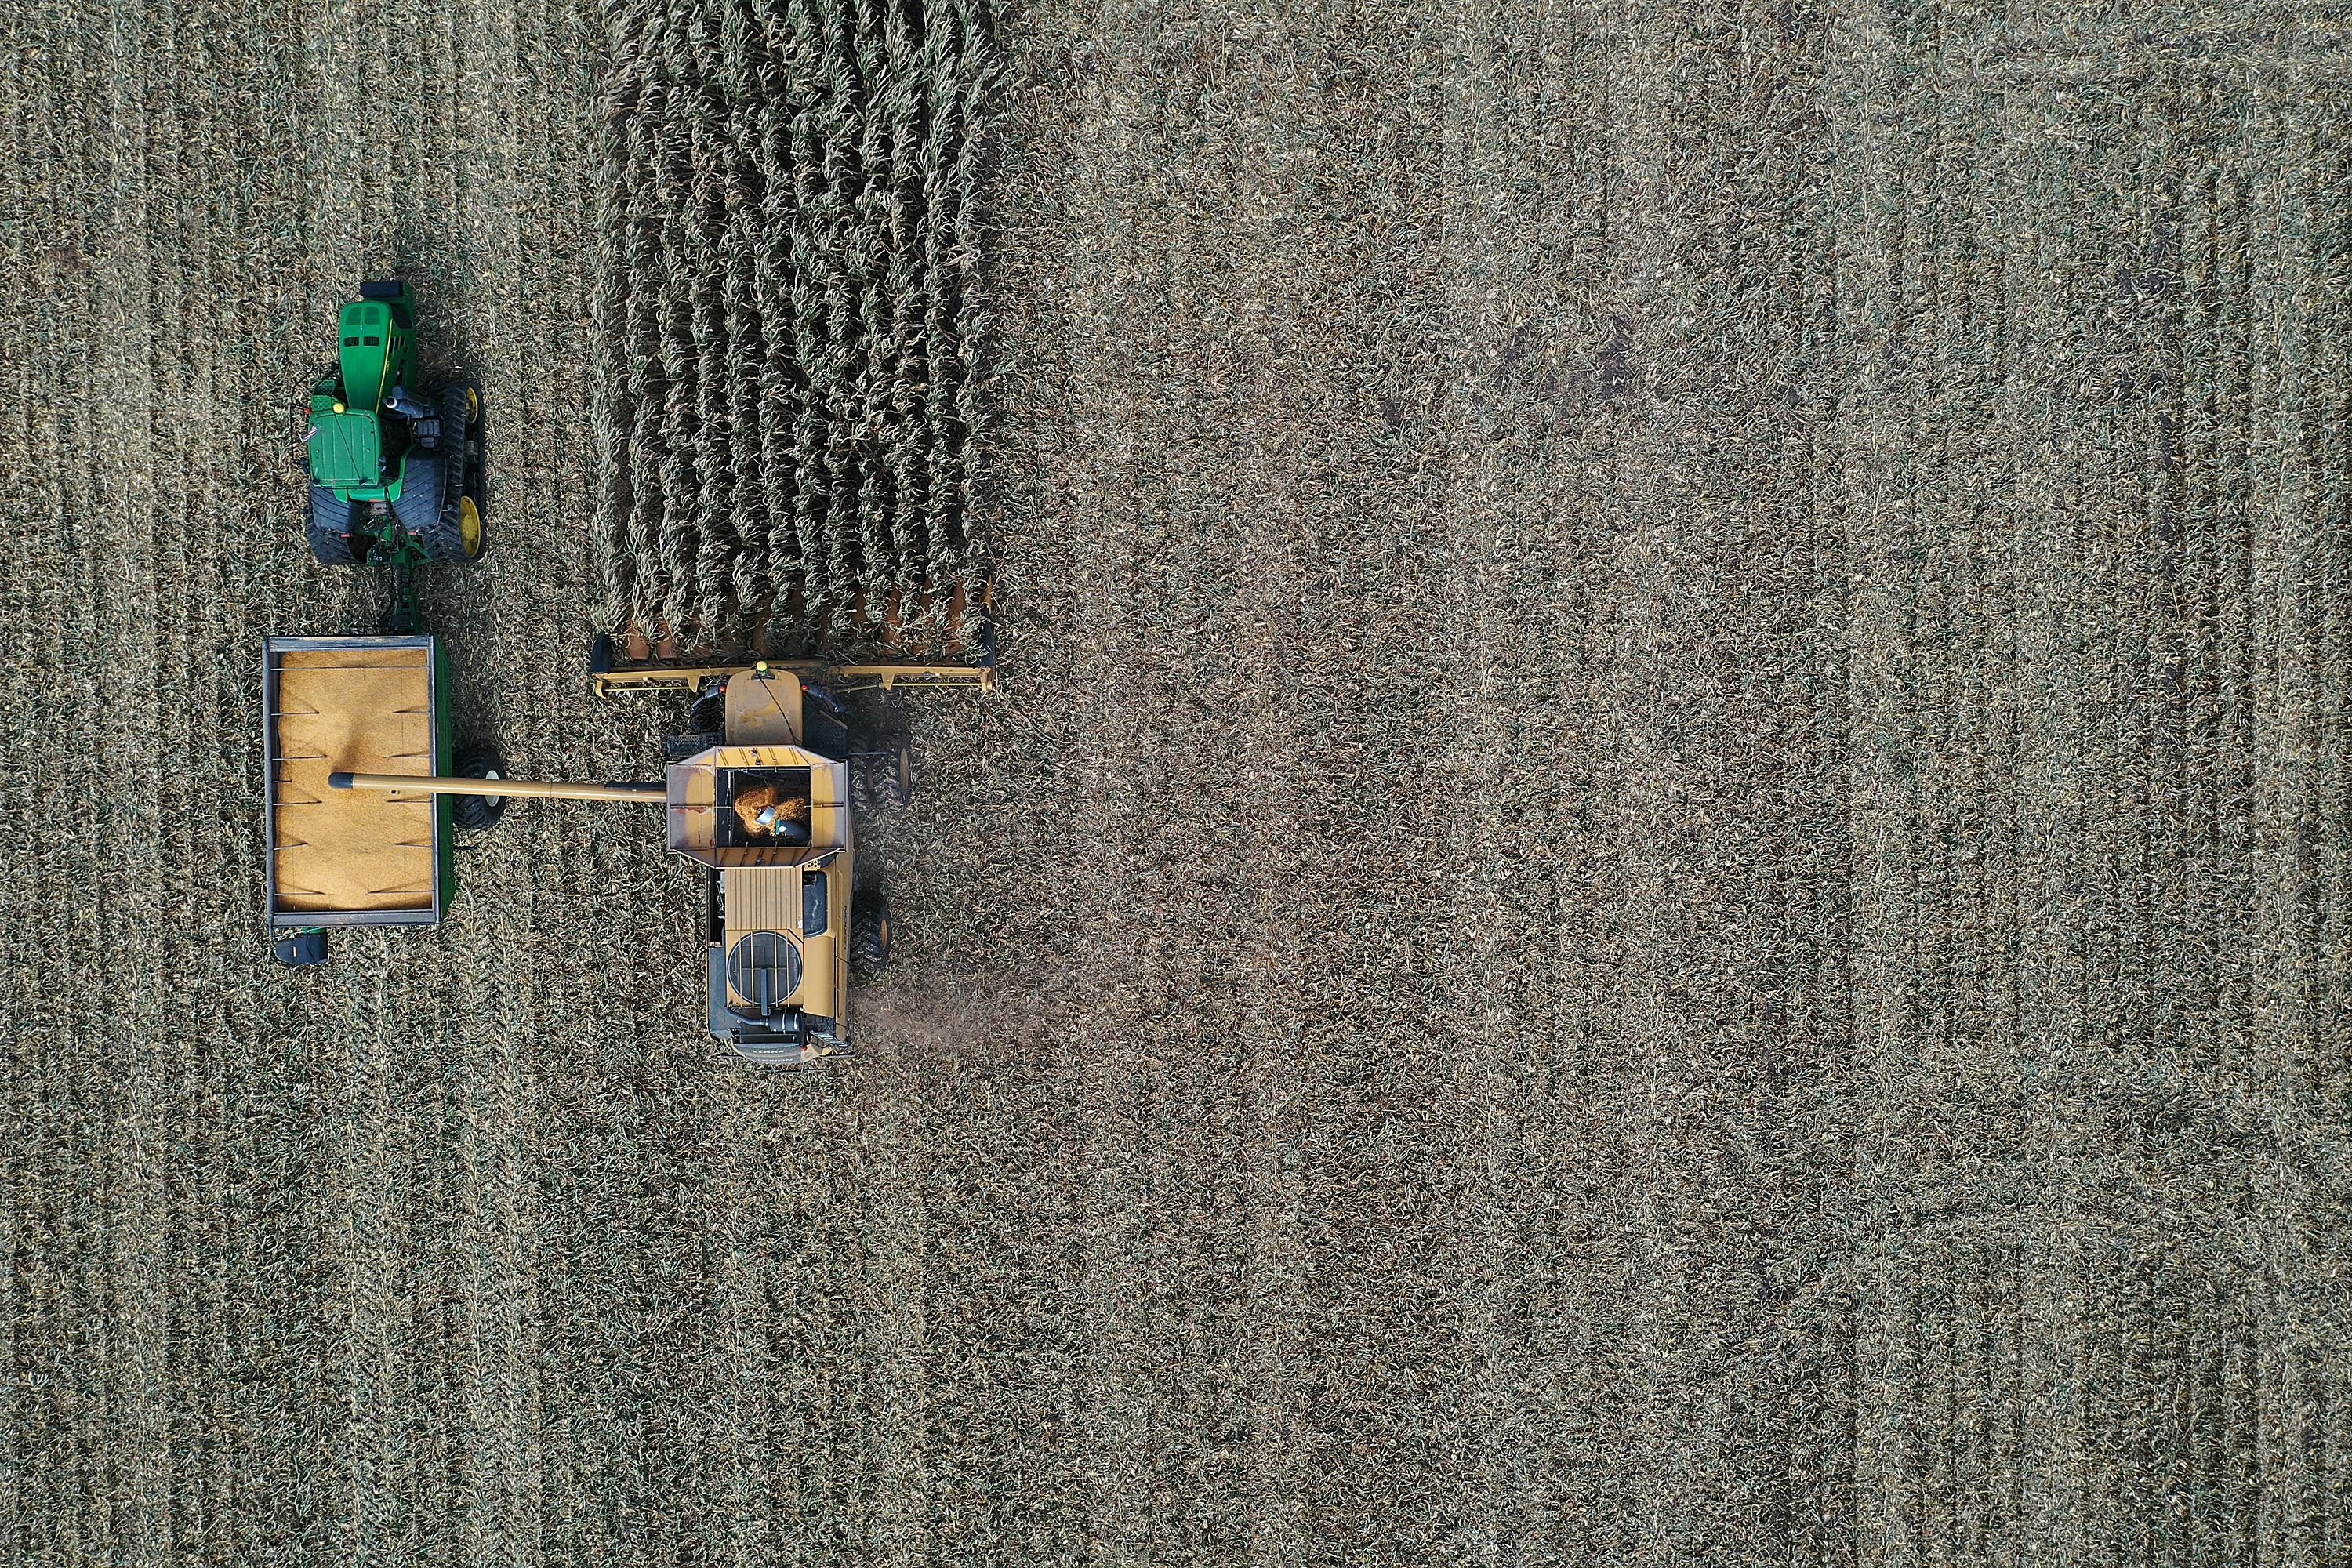 An aerial view from a drone shows a combine harvesting corn.